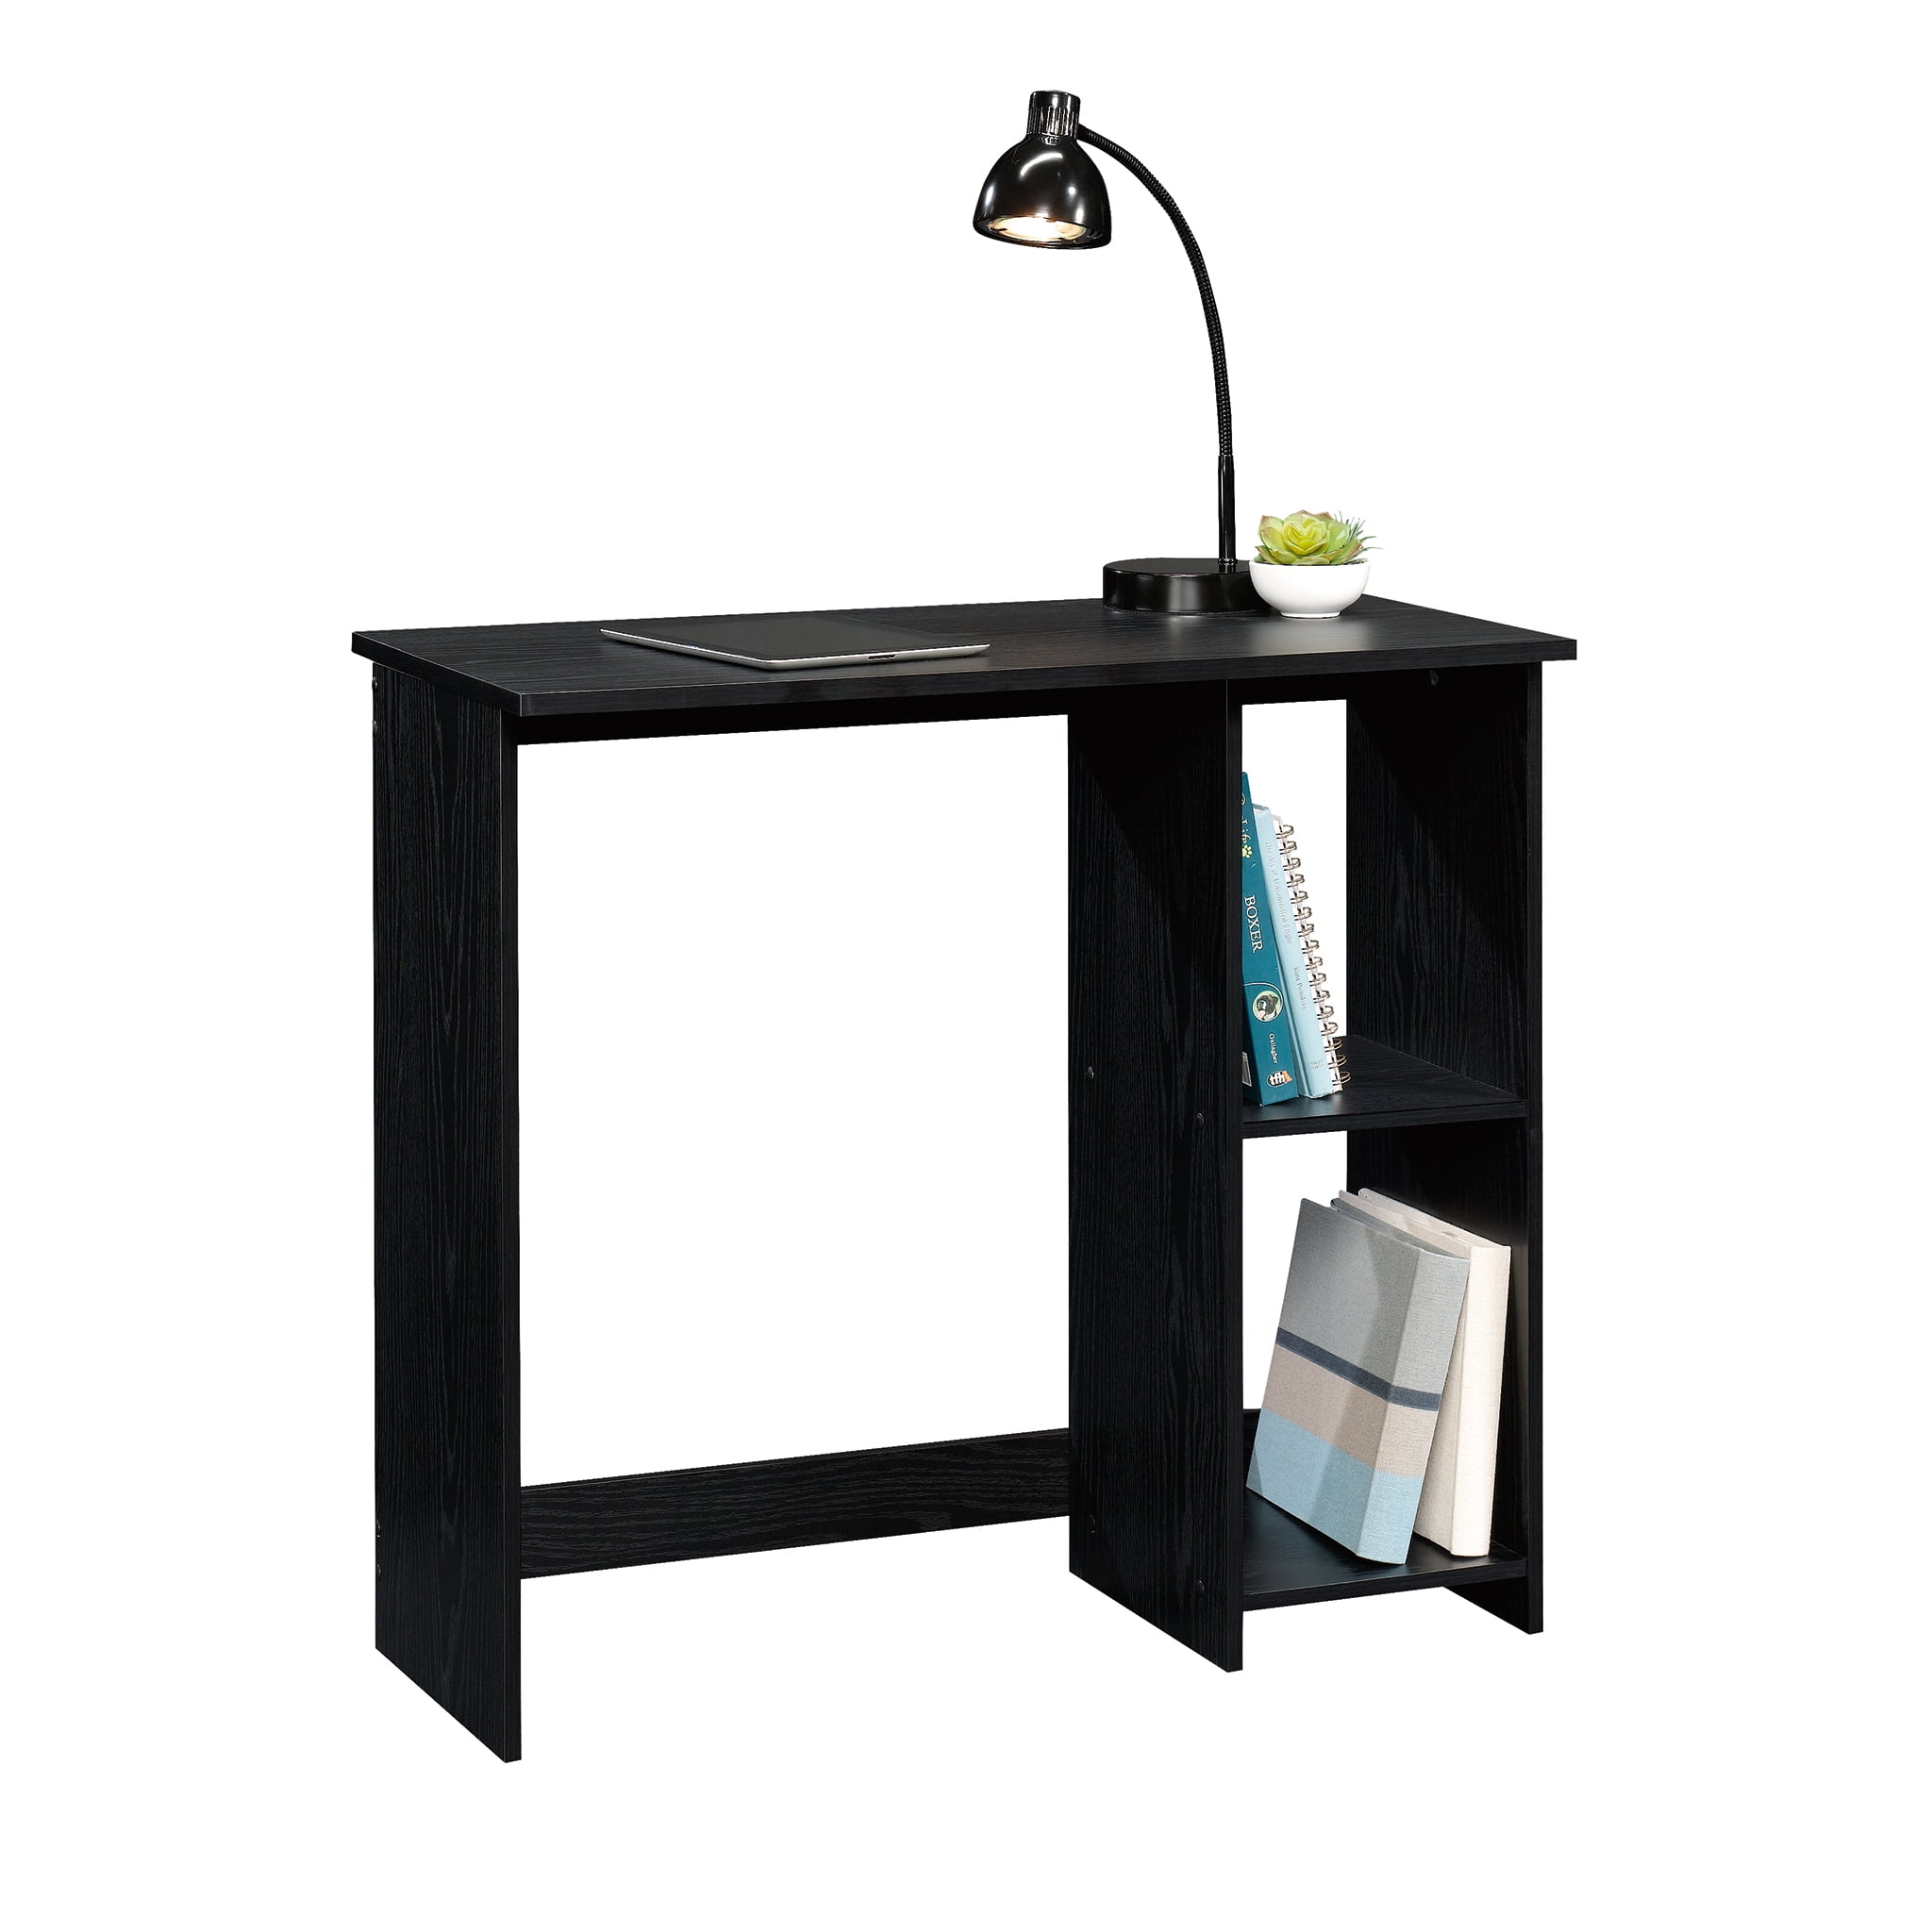 Mainstays Small Space Writing Desk with 2 Shelves, True Black Oak Finish - 3